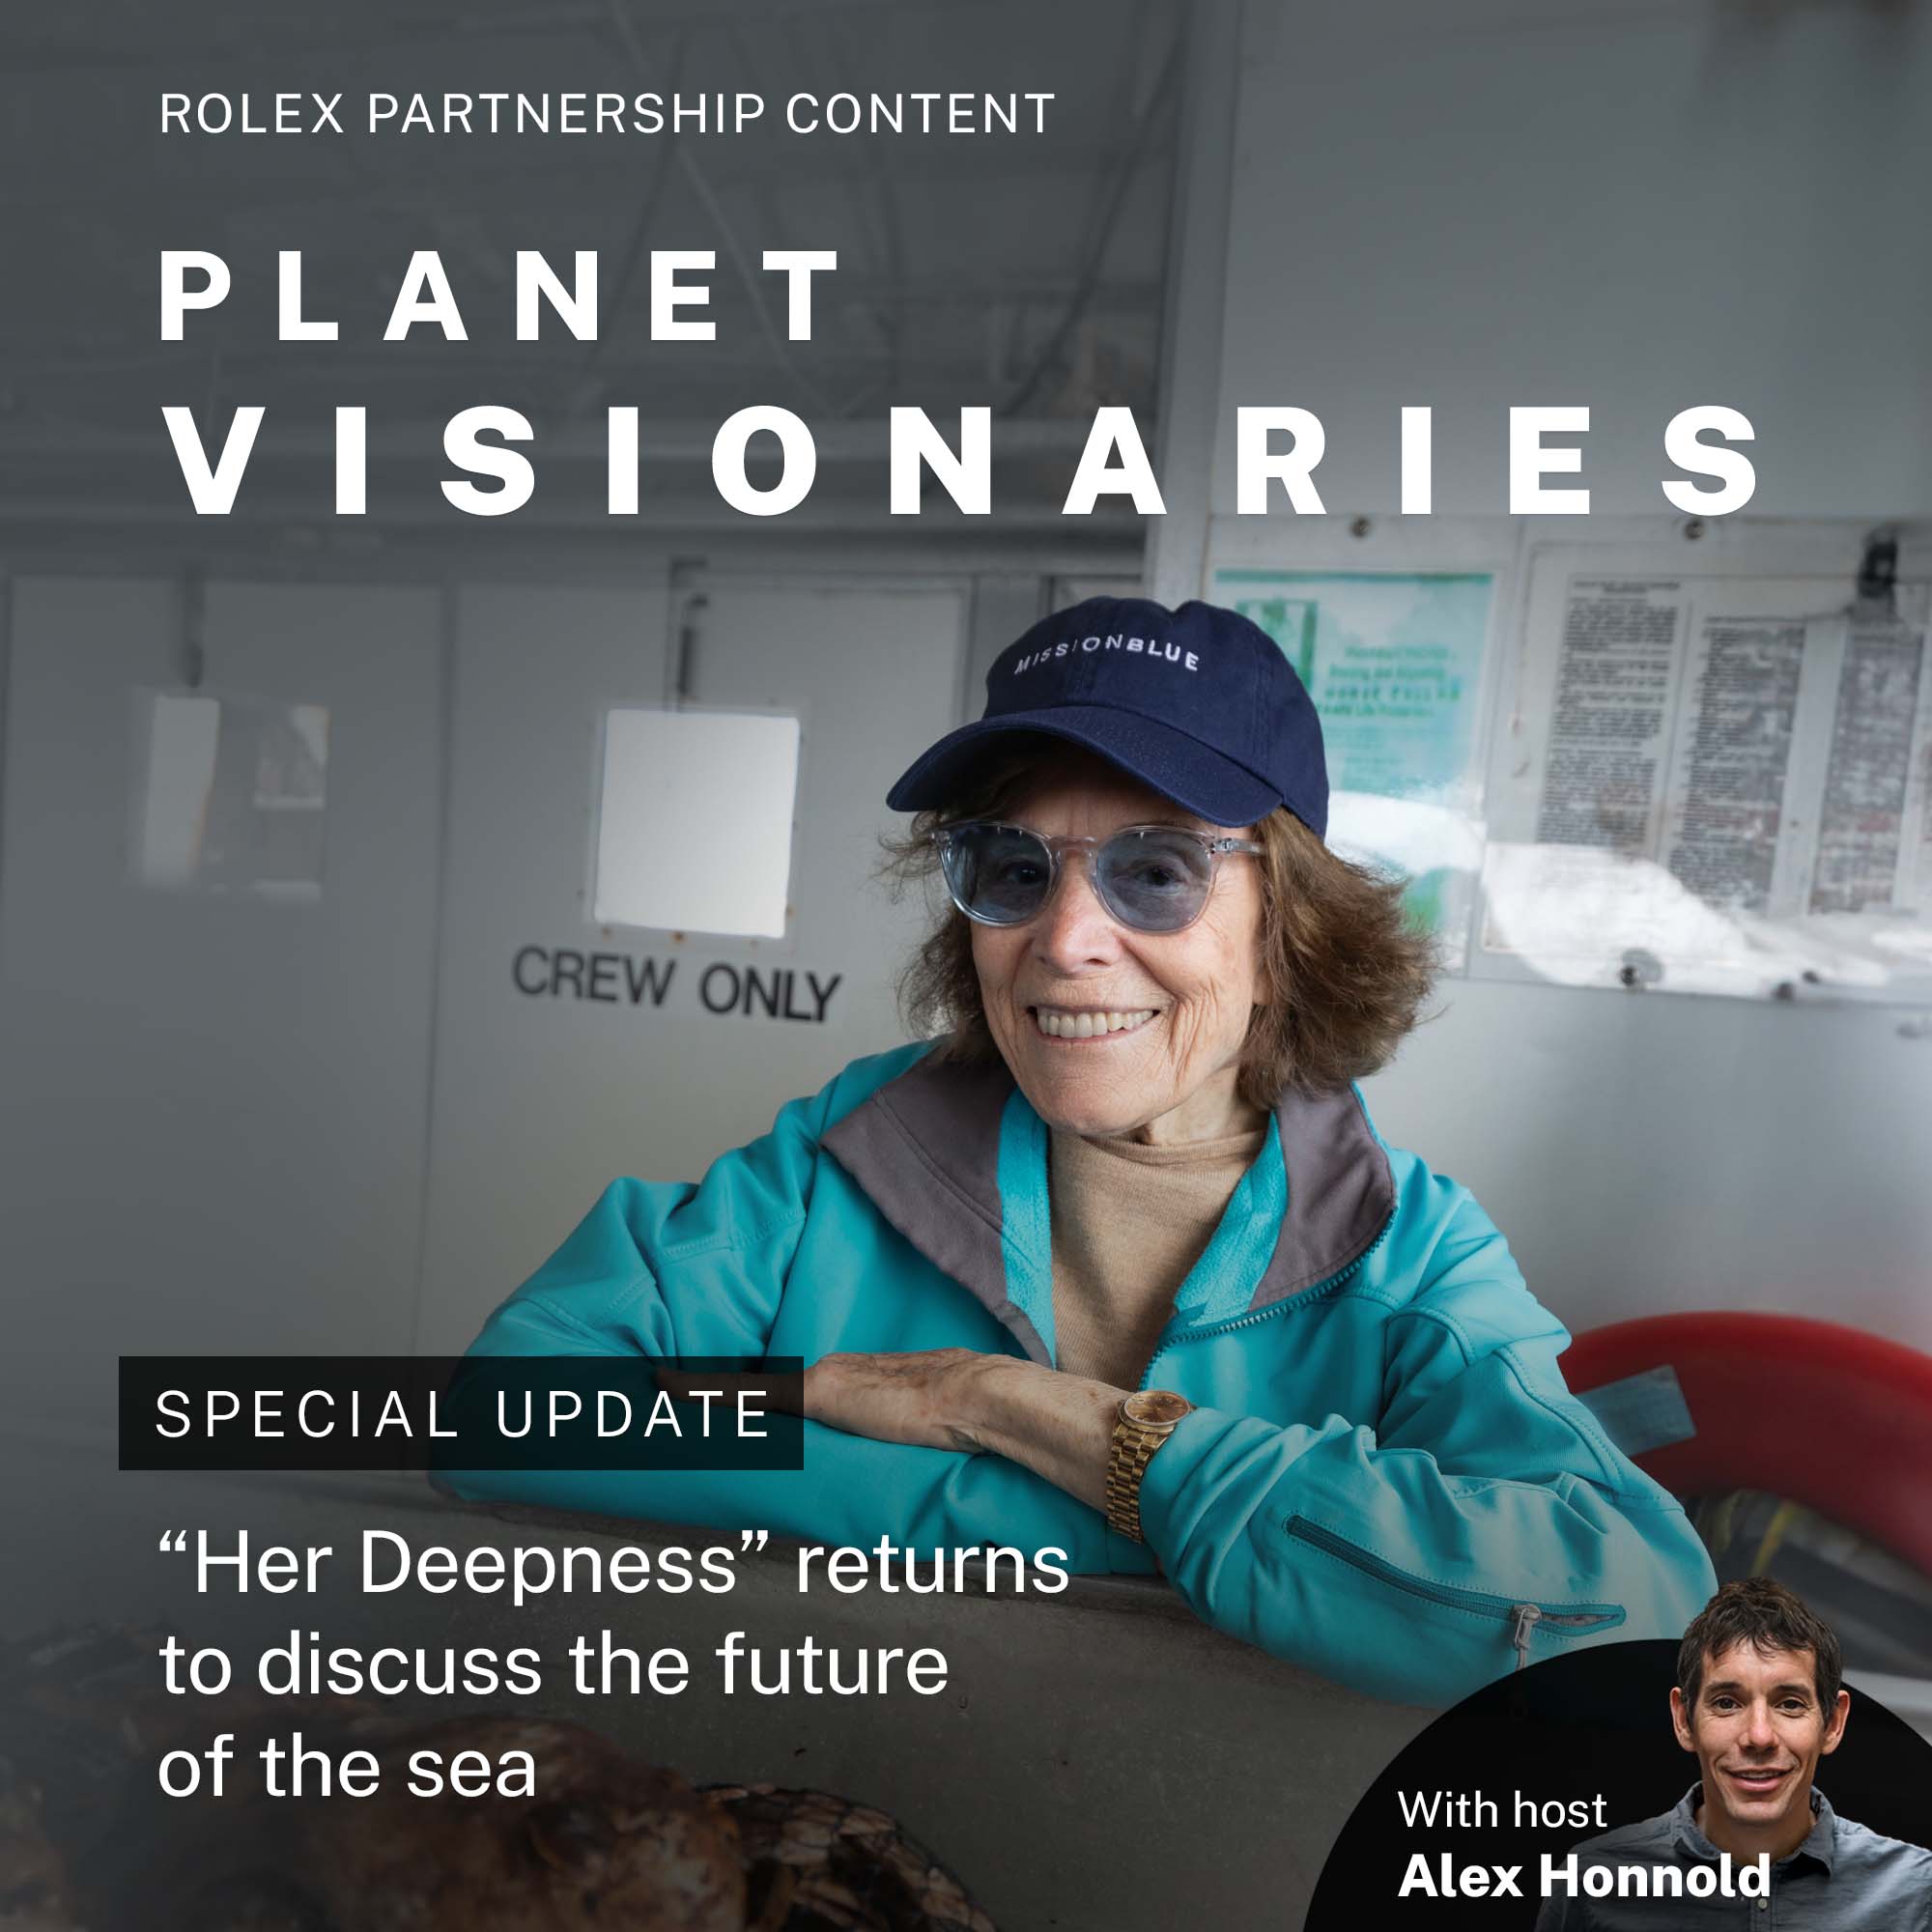 “Her Deepness” returns to discuss the future of the sea